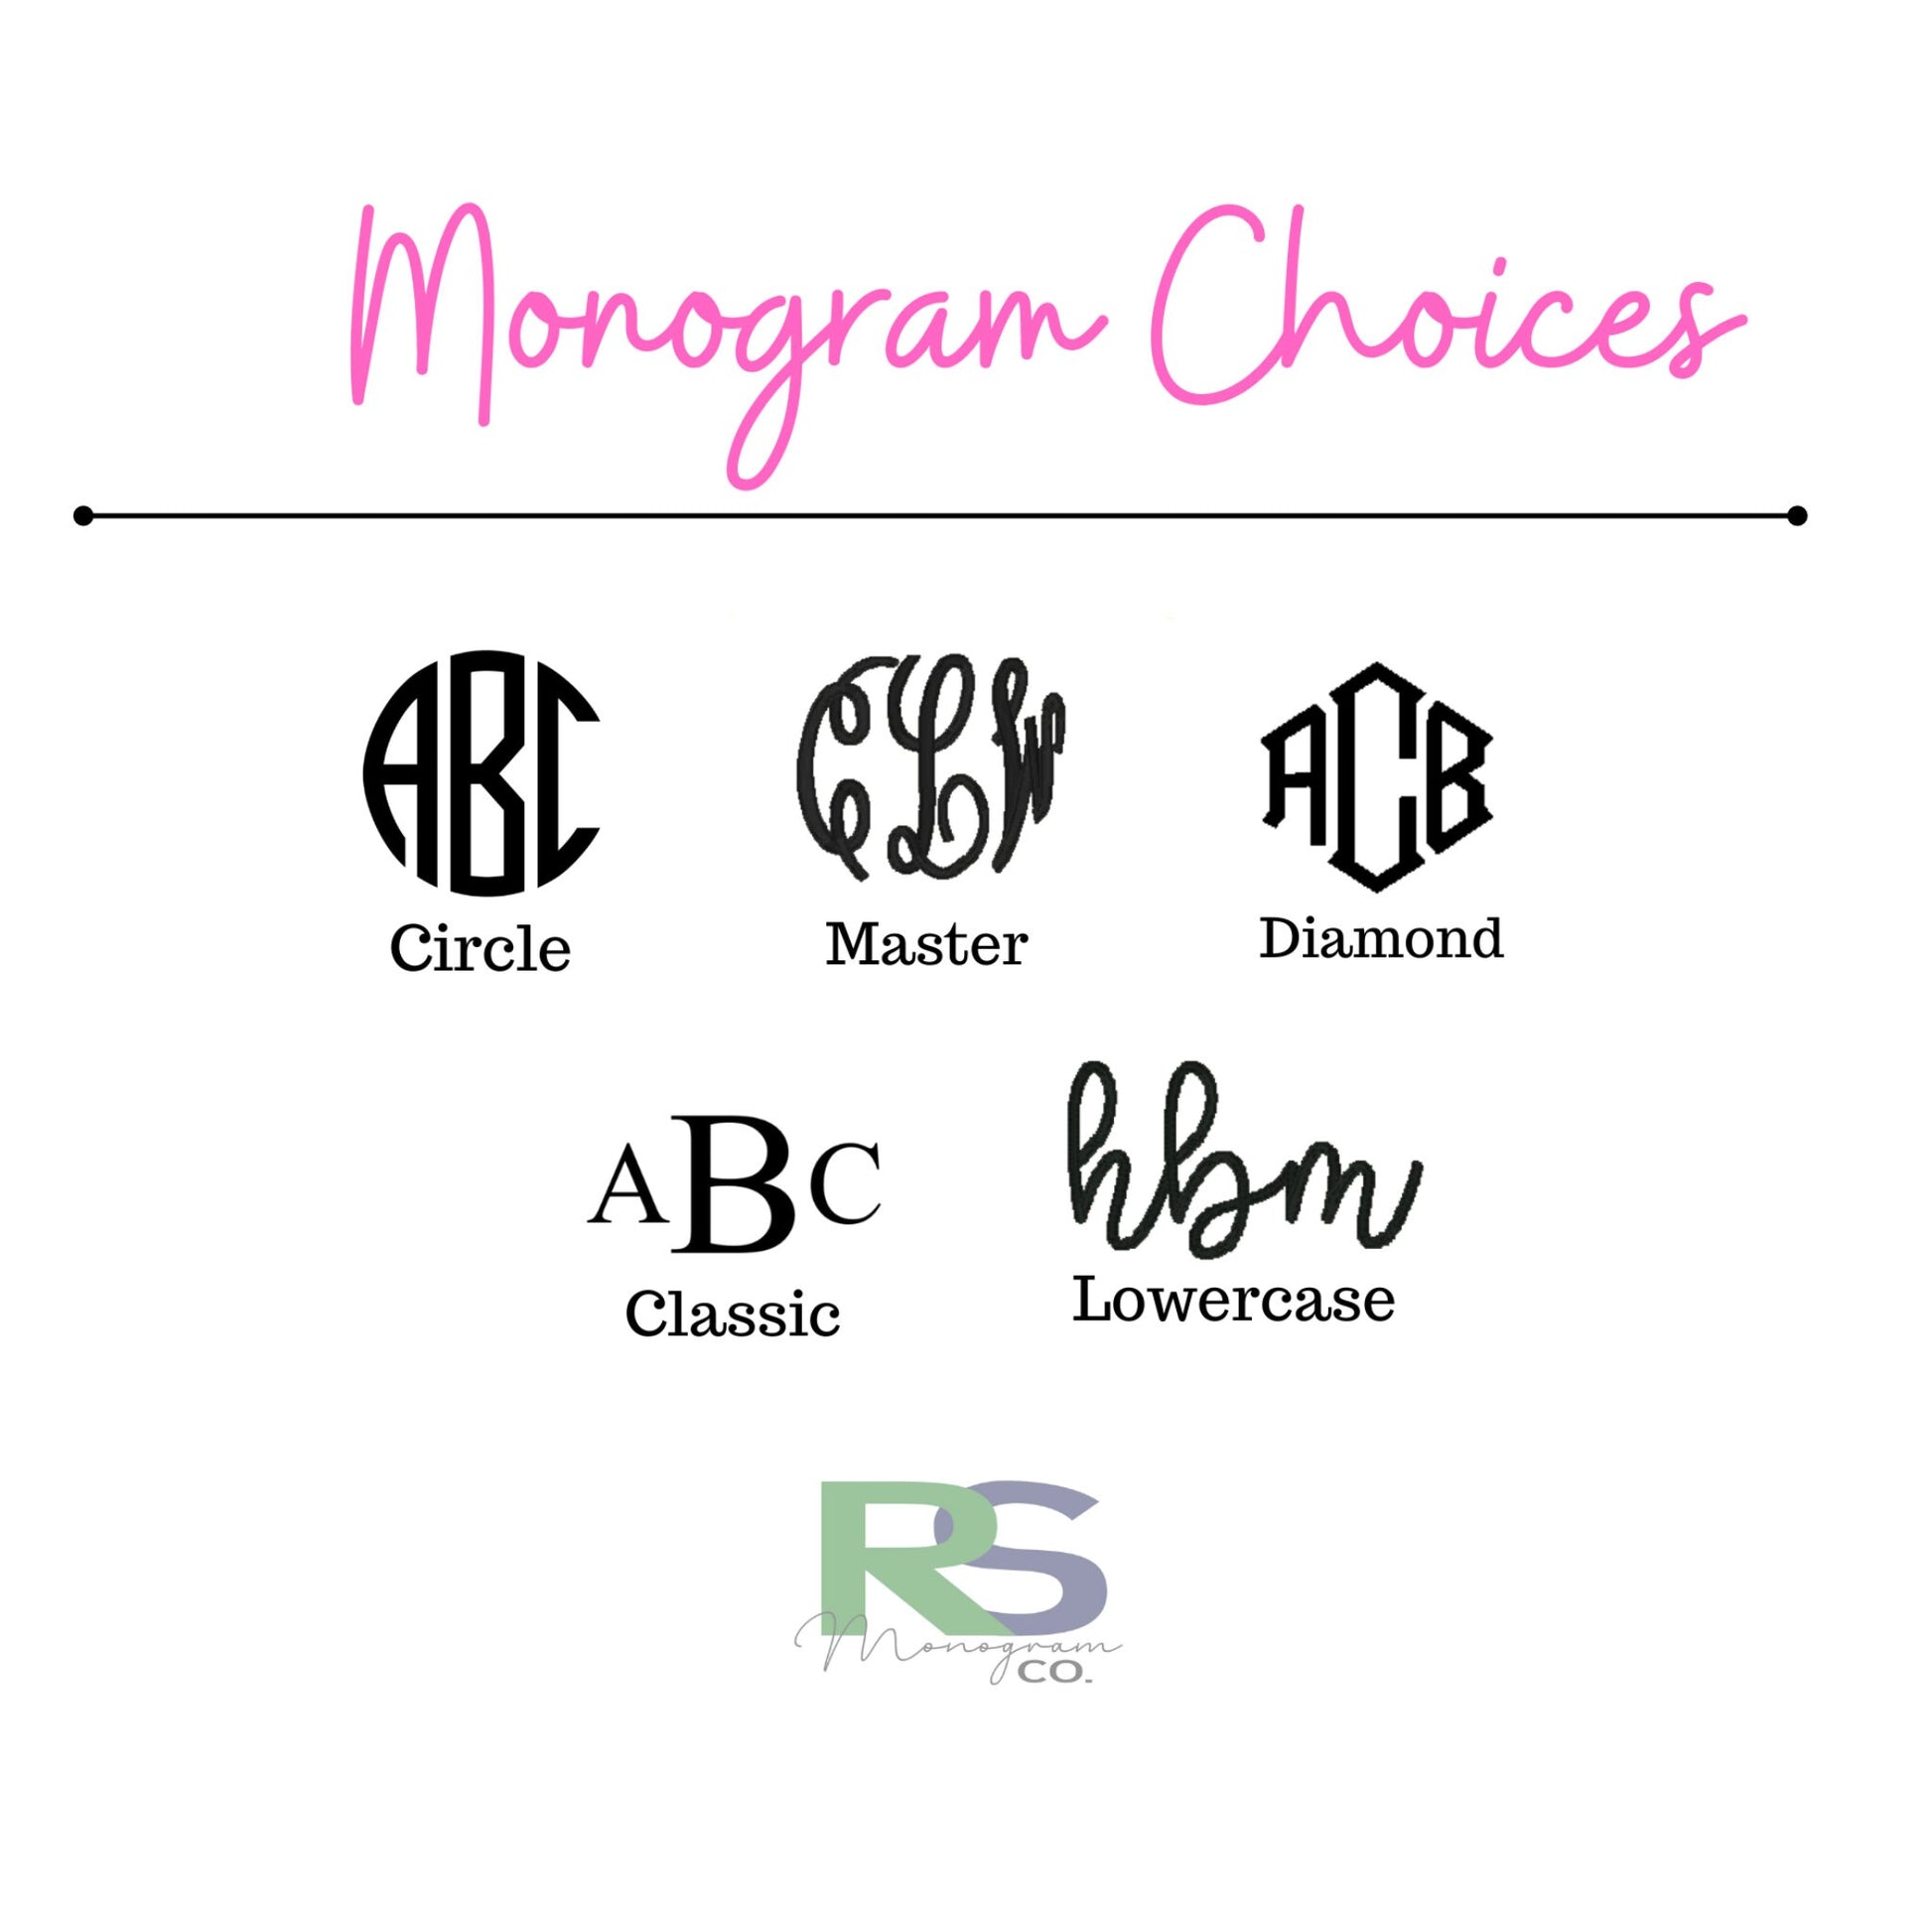 Monogrammed Belt Bag – Southern Touch Monograms